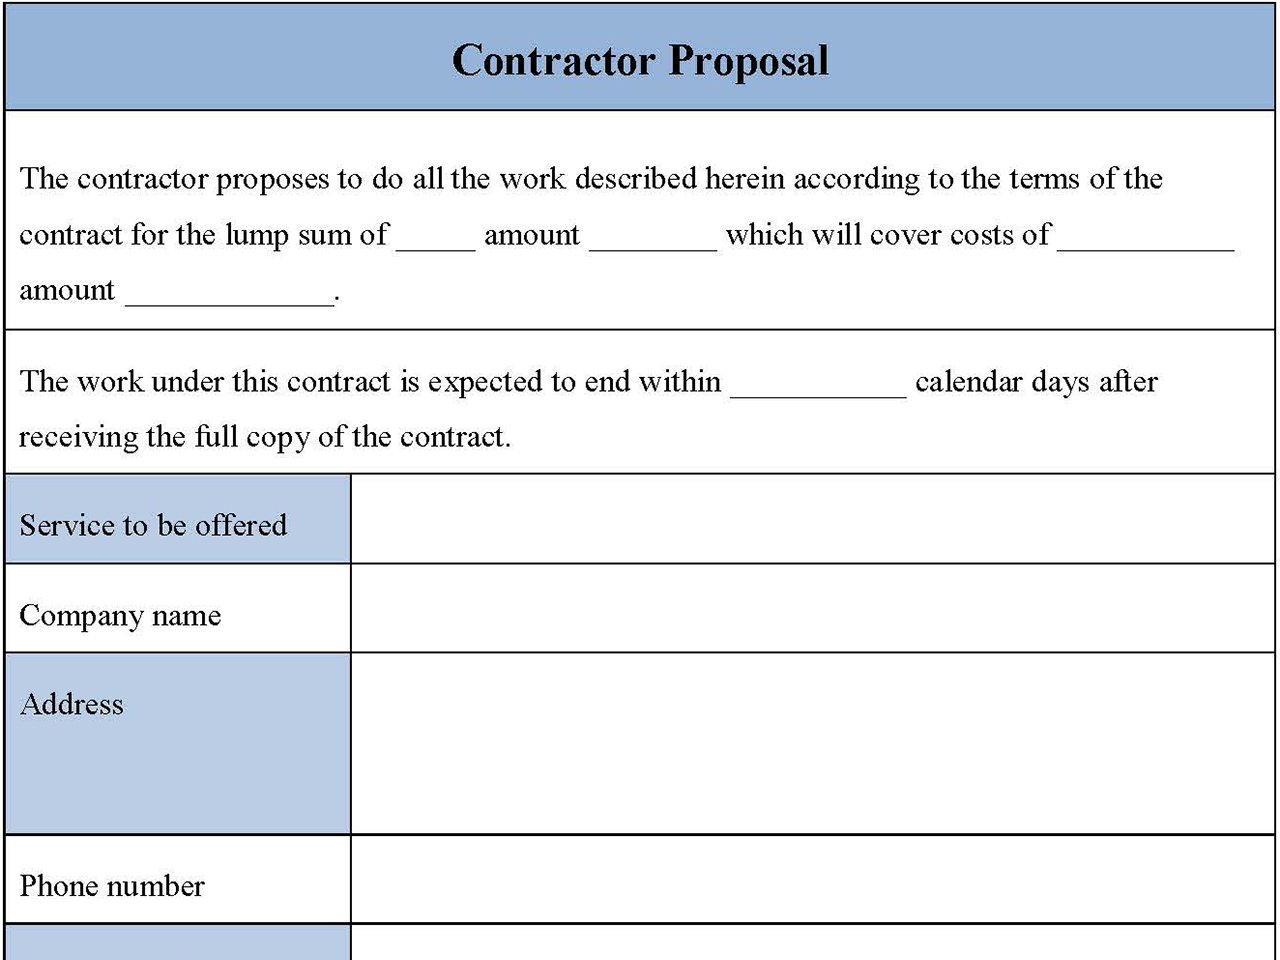 Contractor Proposal Form